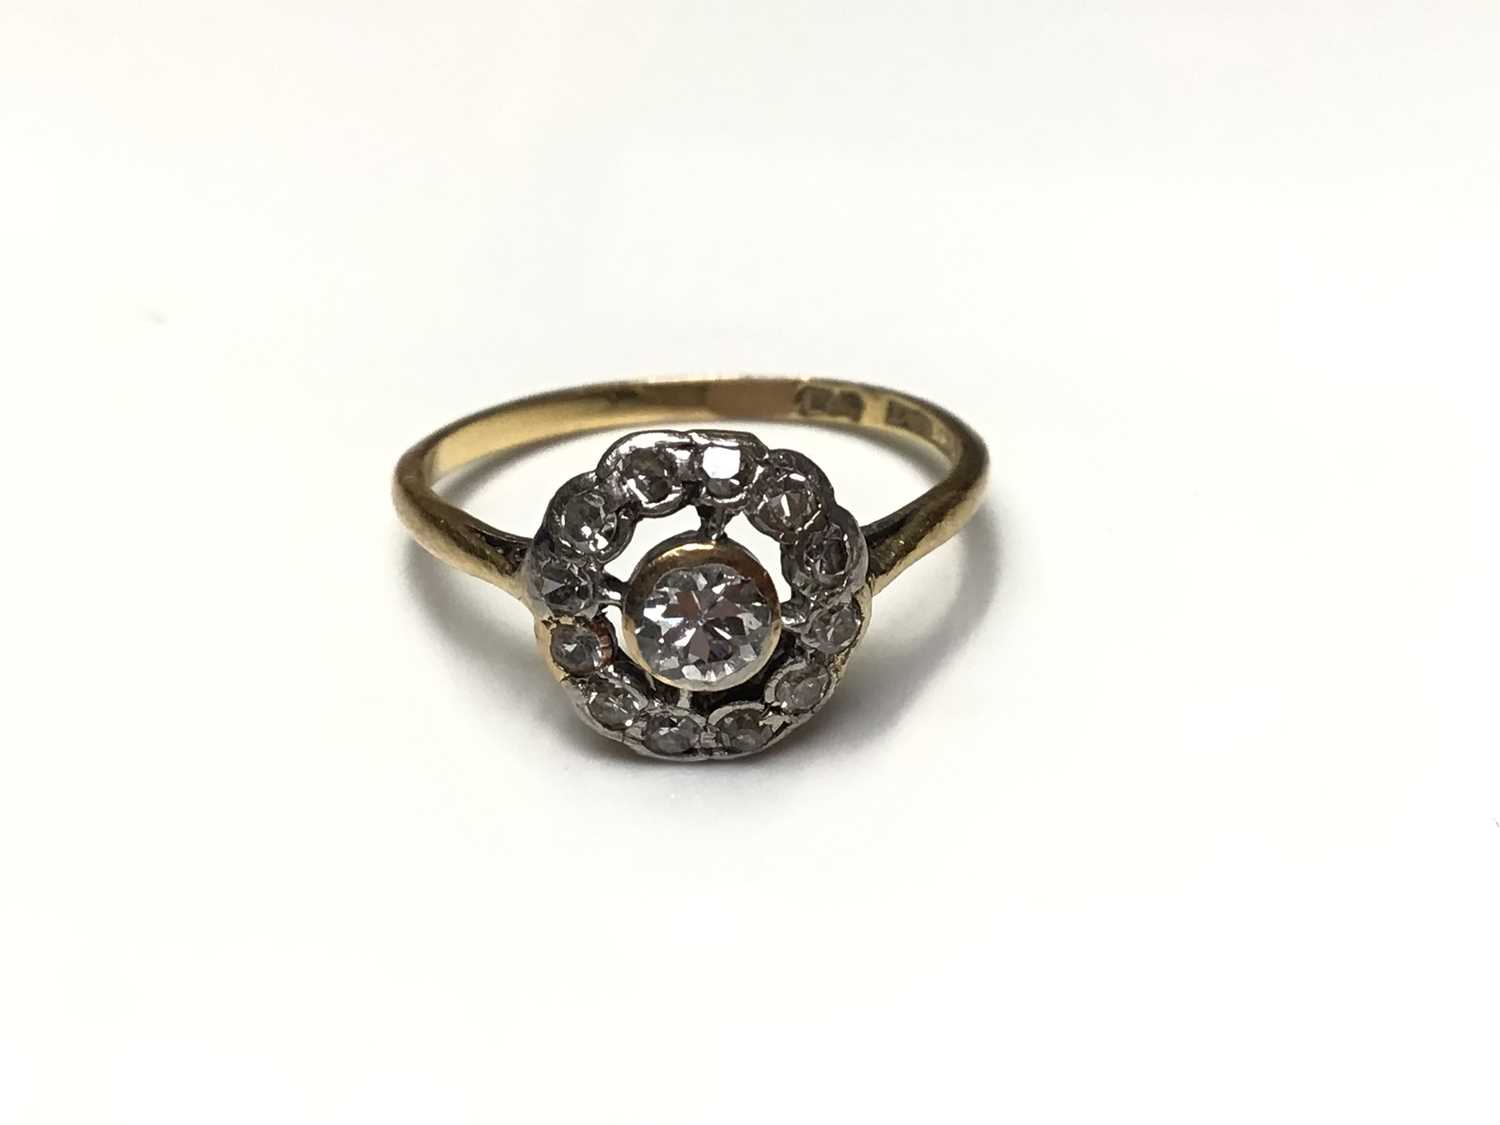 Lot 35 - Antique diamond cluster ring with an openwork cluster of diamonds in platinum setting on 18ct gold shank